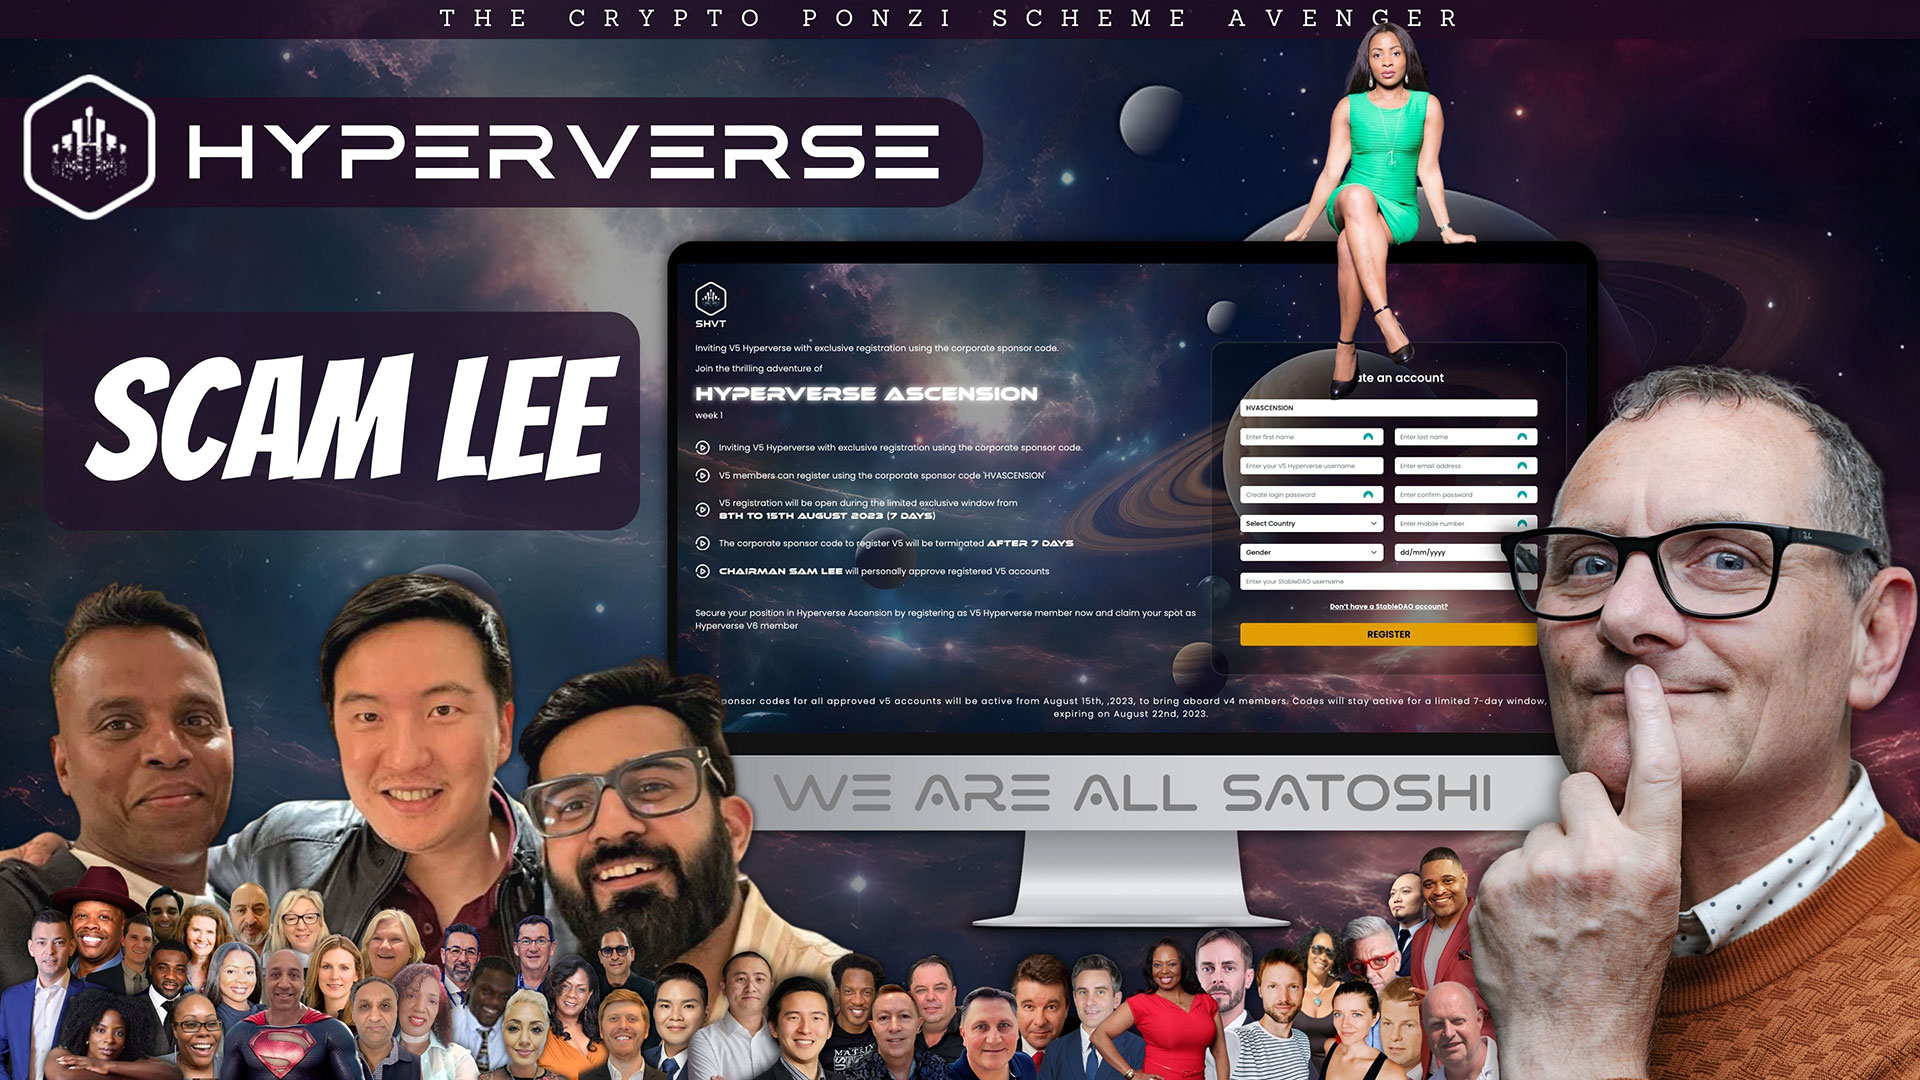 VIP5/6 Deceit Exposed: Unraveling the HyperVerse ASCENSION Ponzi Scheme | 'Scam Lee's' Web of Lies!